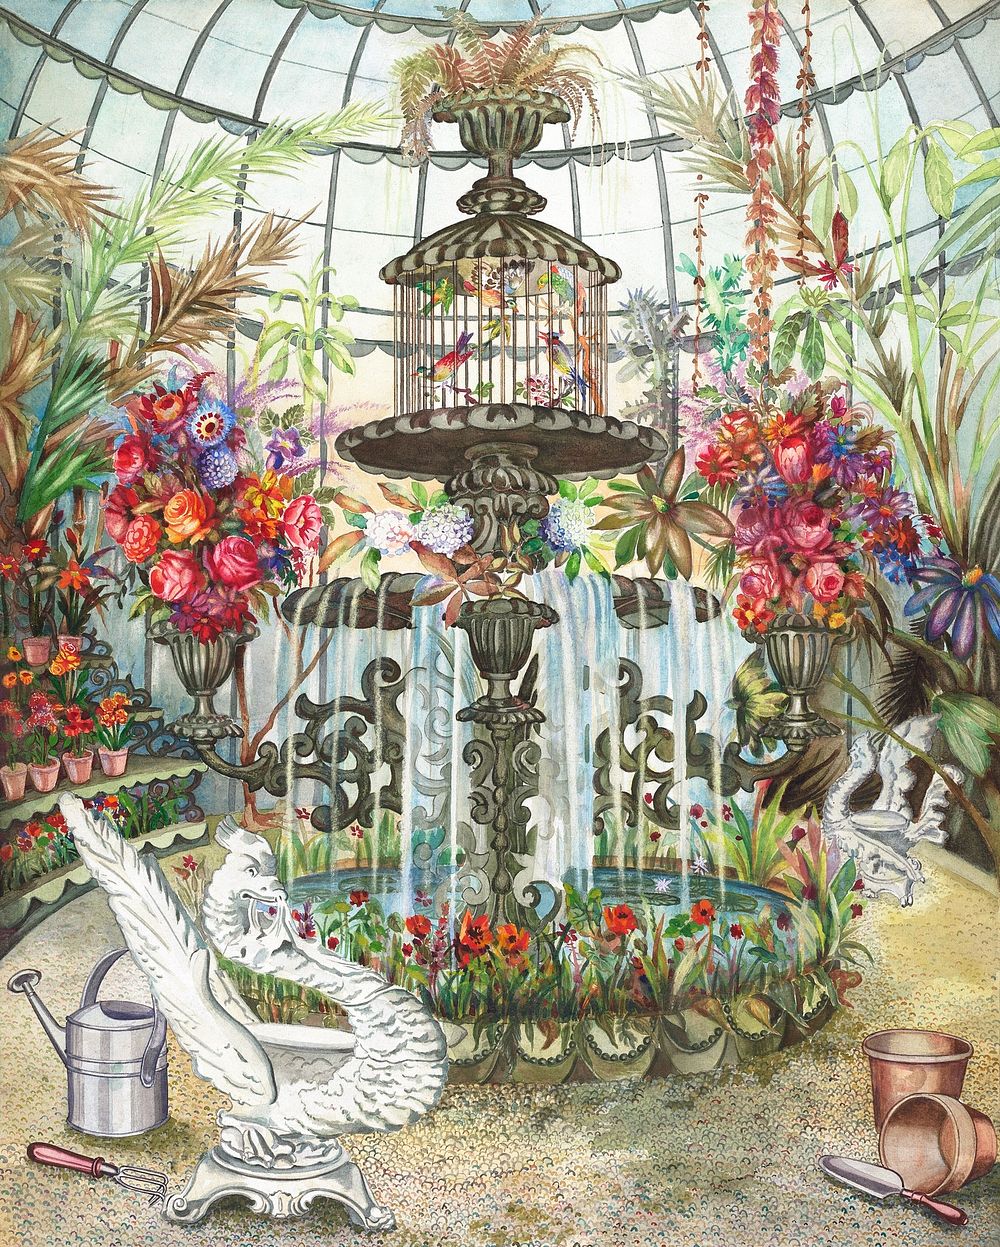 Conservatory Fountain (1938) vintage illustration by Perkins Harnly and Nicholas Zupa. Original public domain image from The…